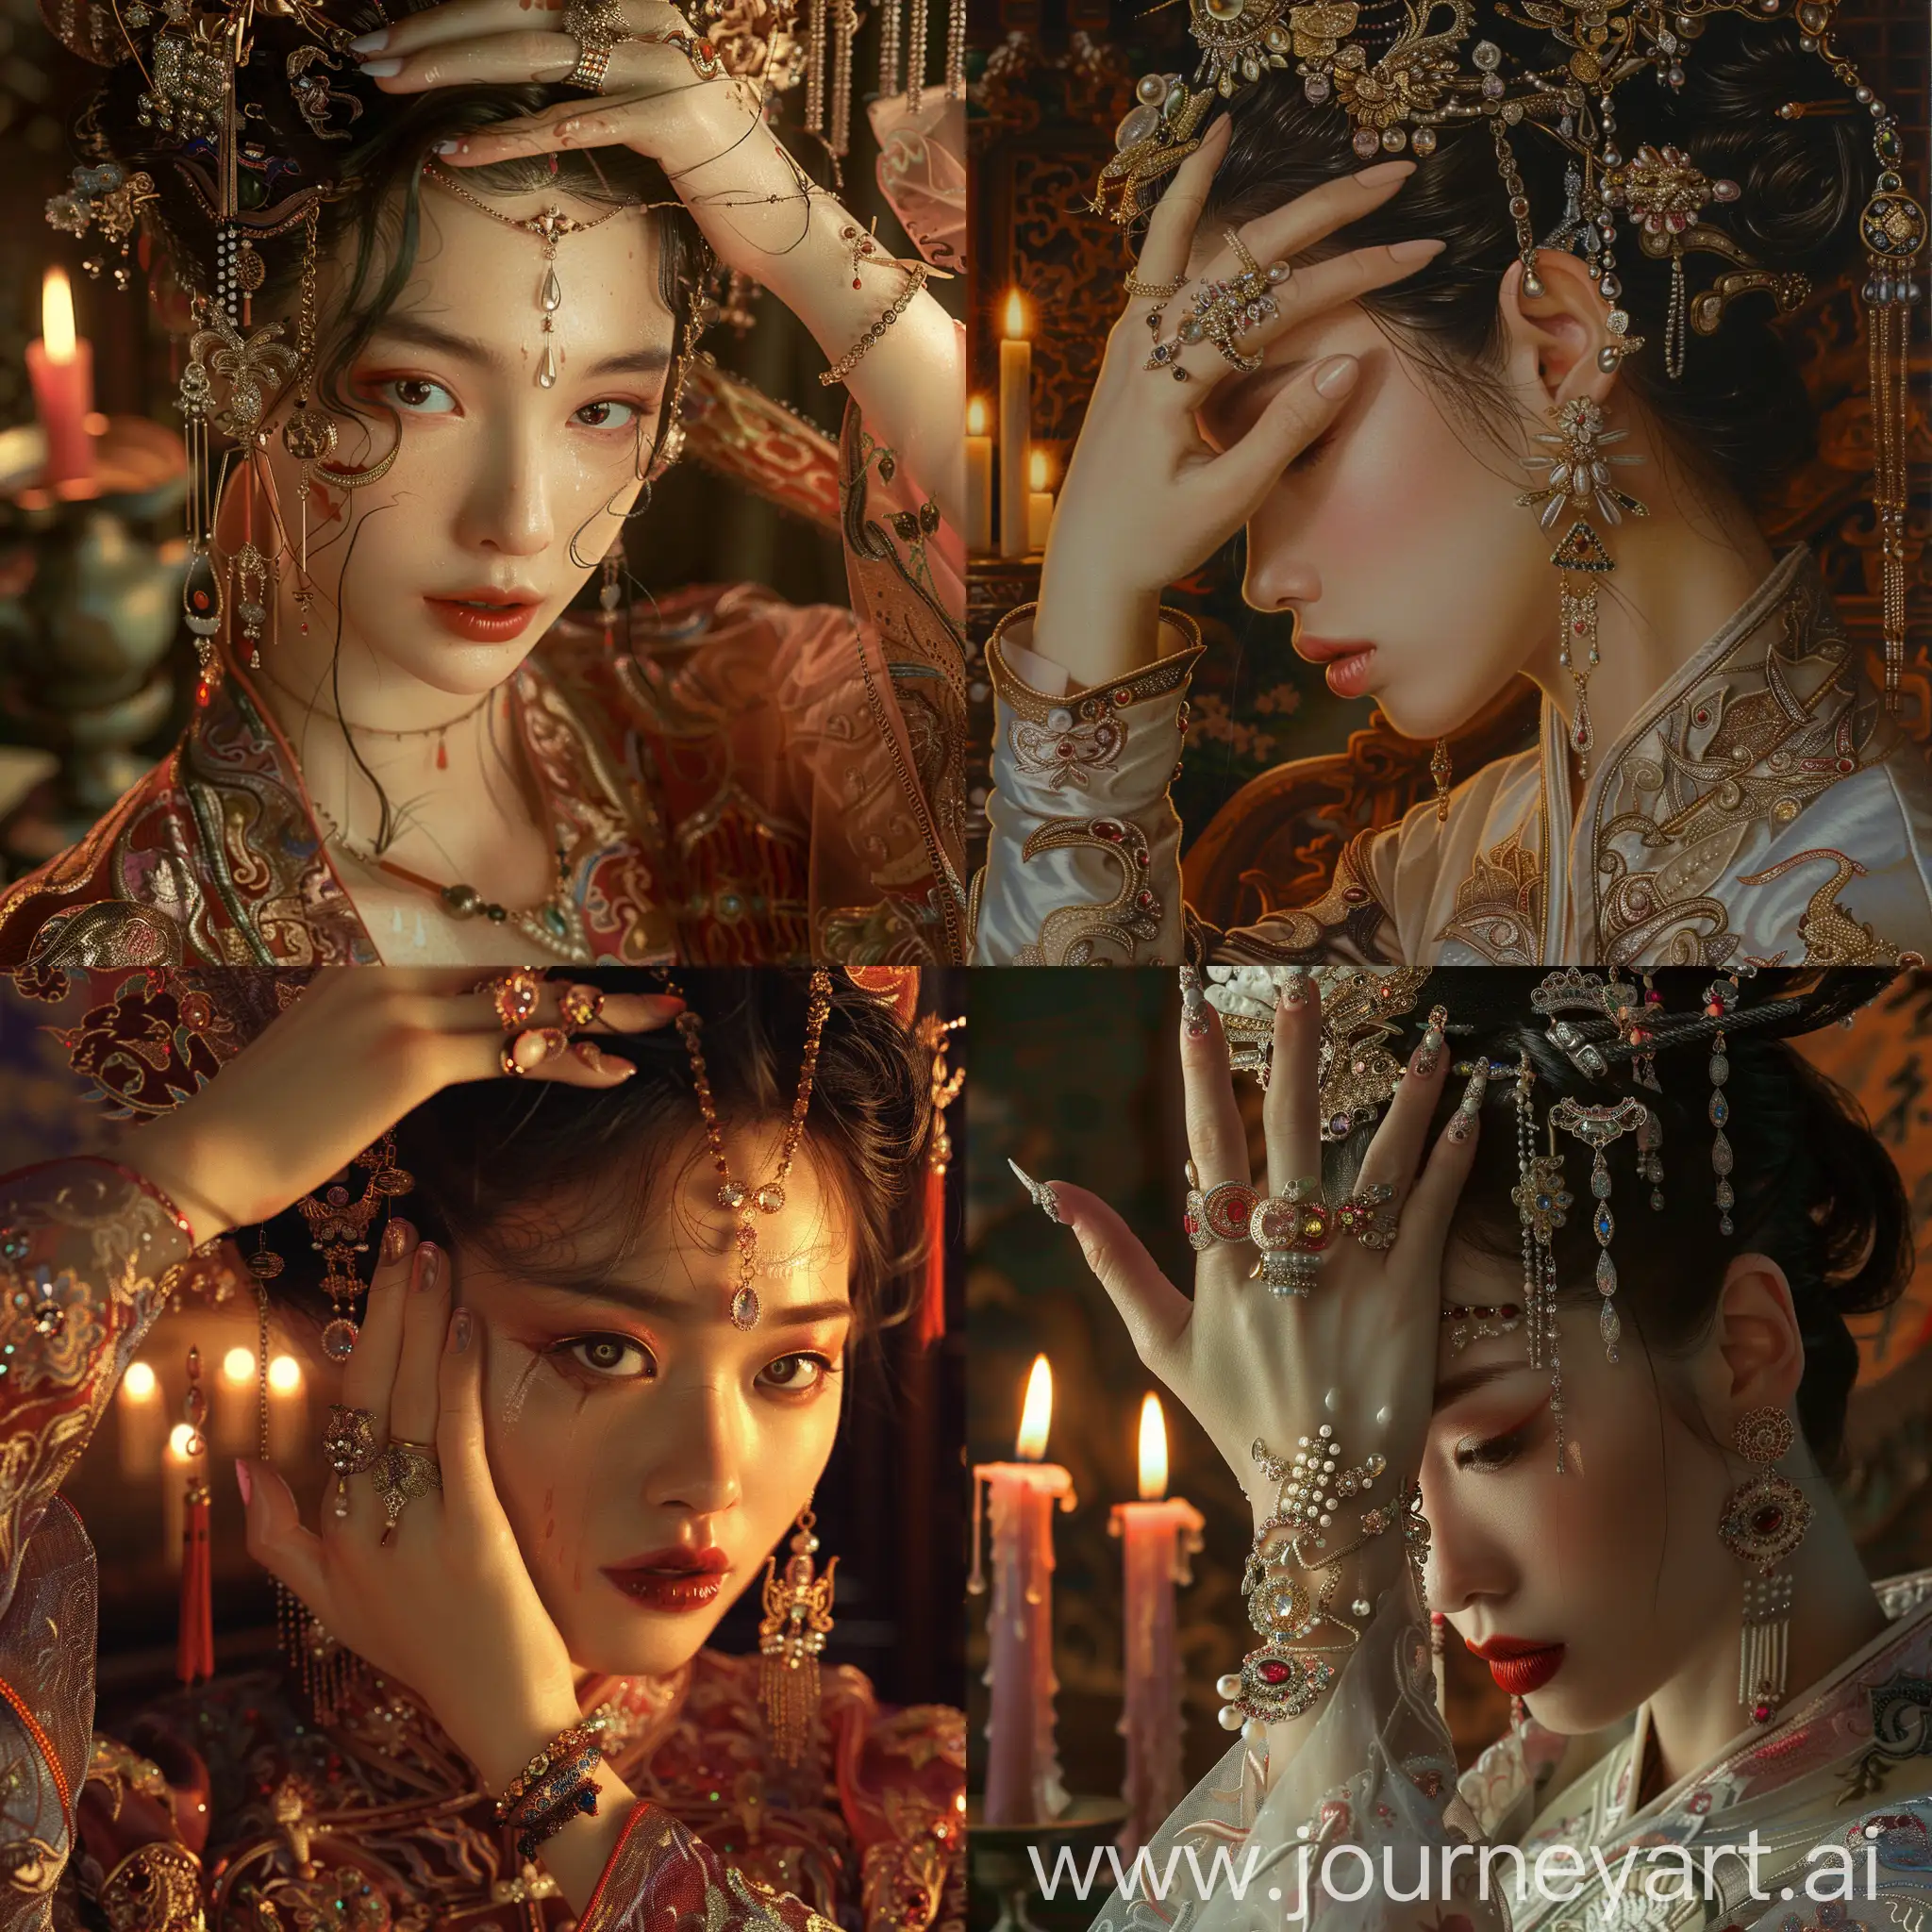 Chinese-Empress-Gracefully-Adorned-with-Jewelry-in-Candlelit-Splendor